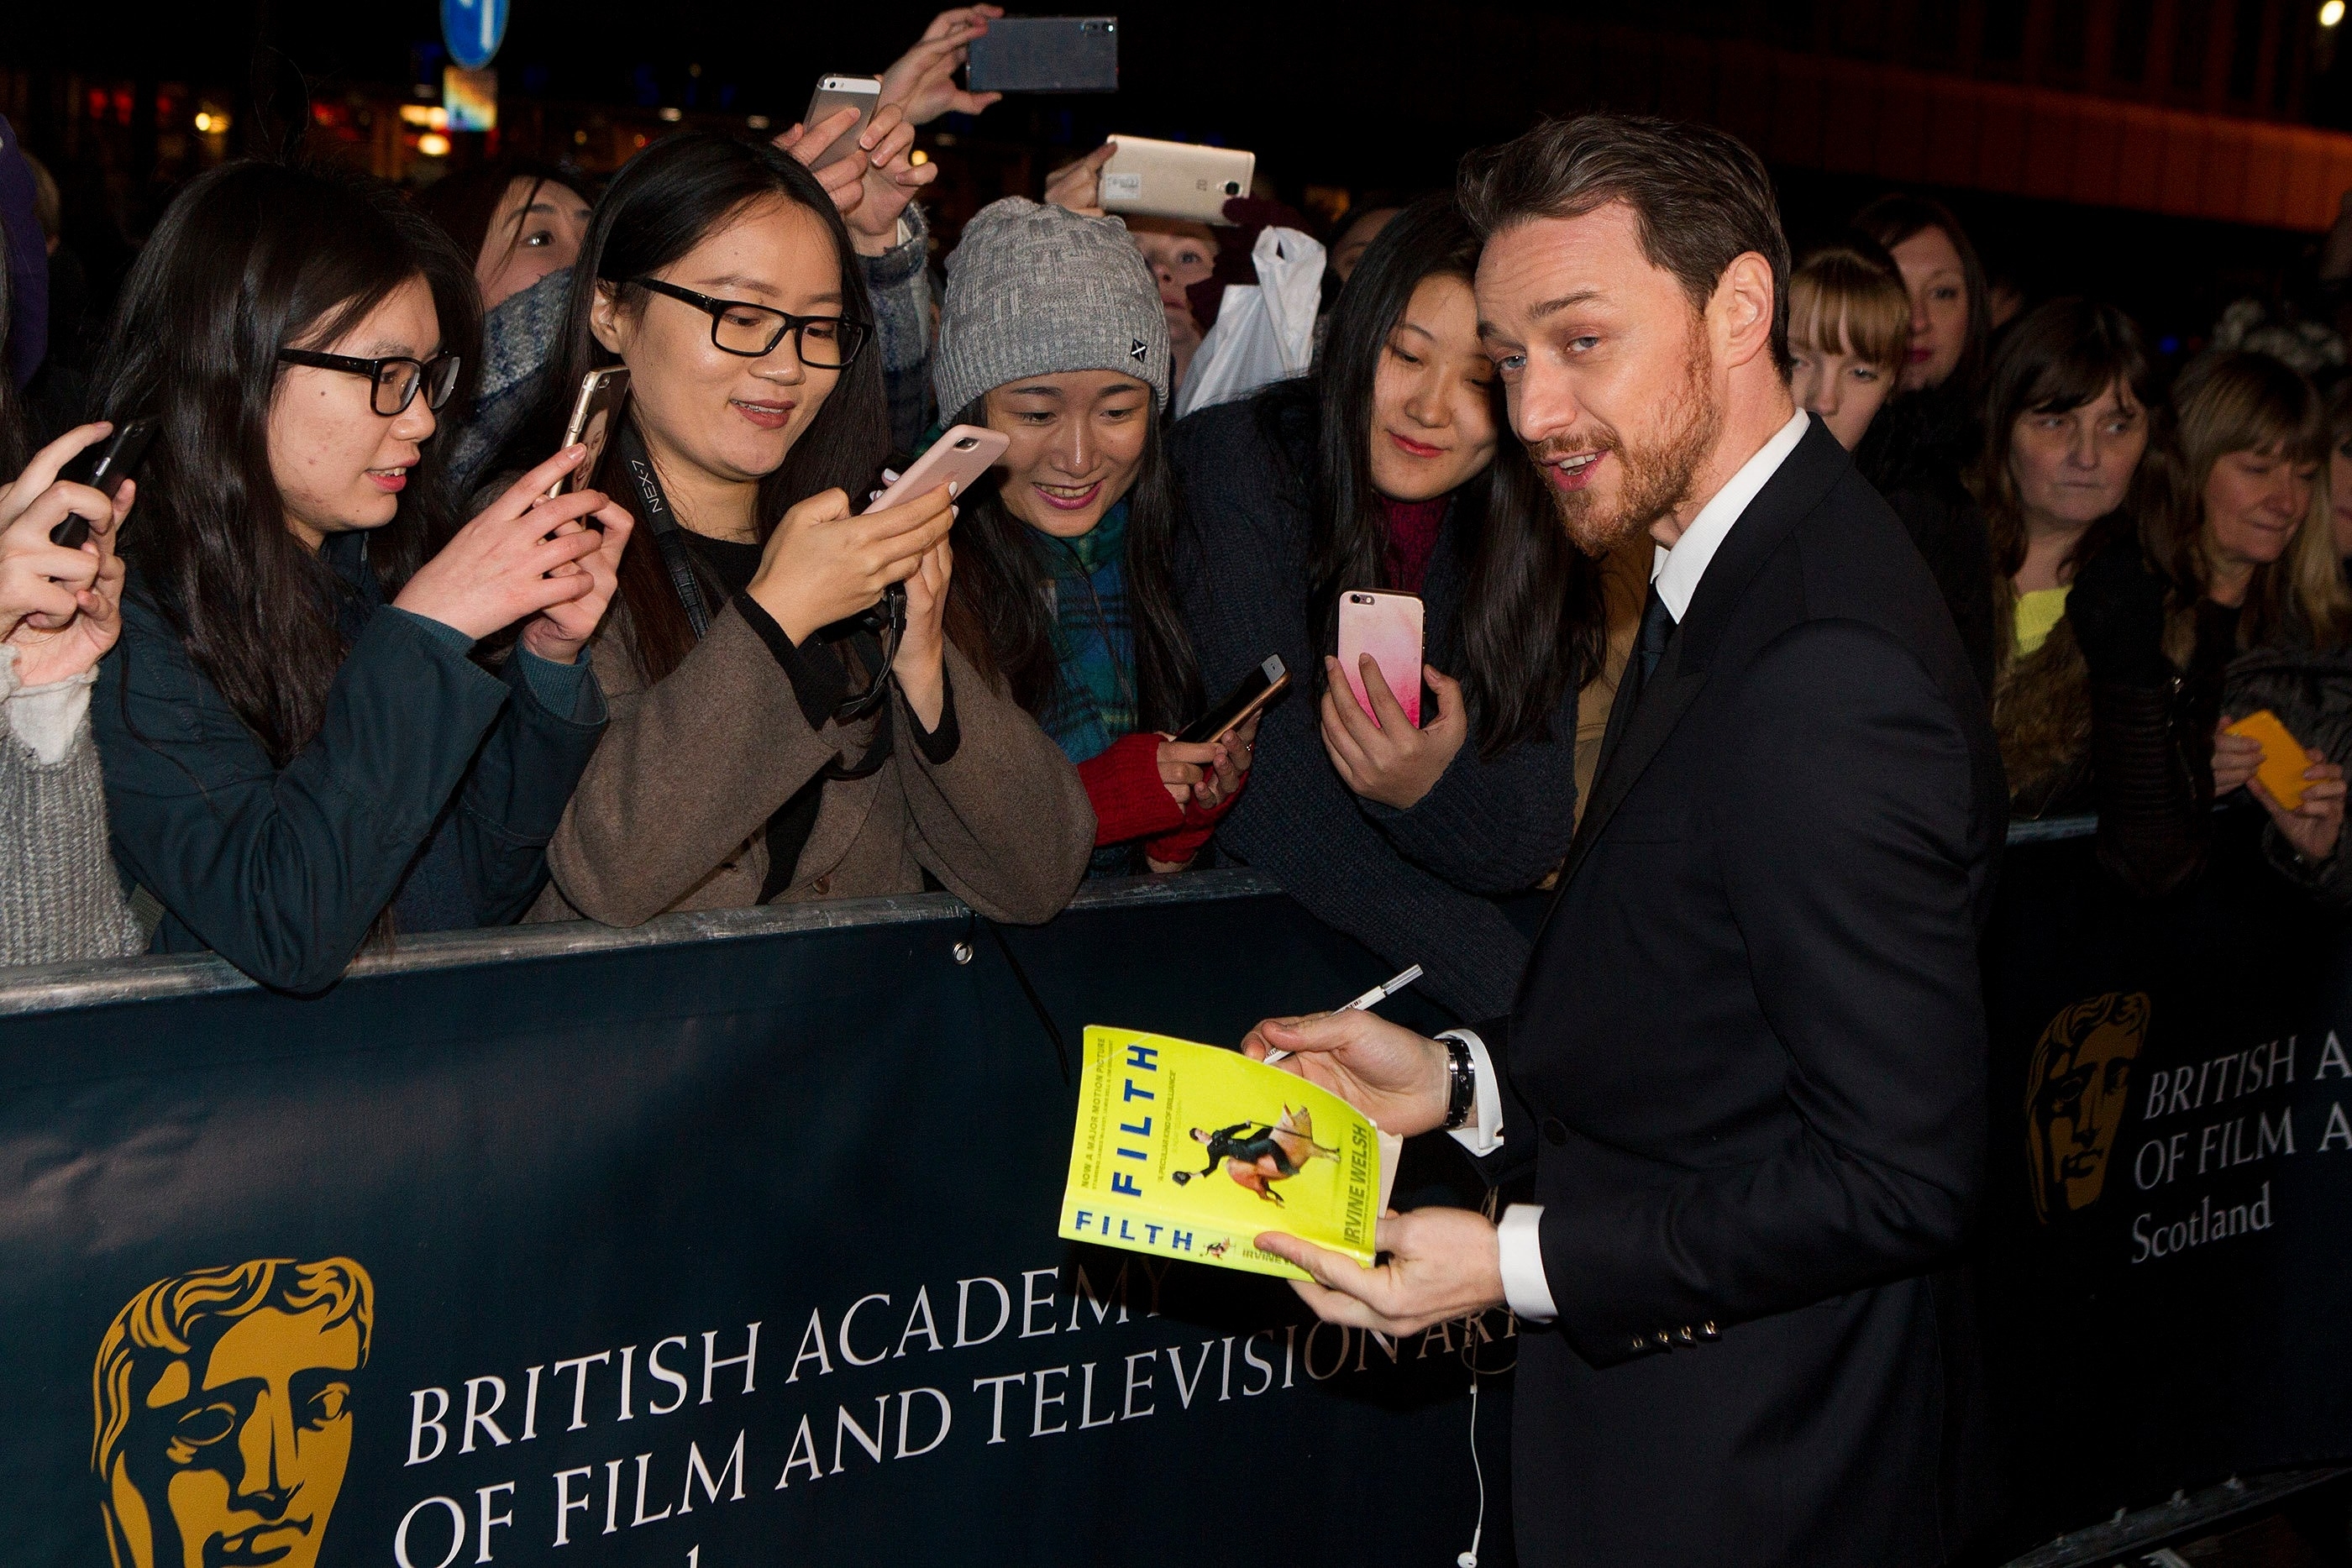 Actor James Mcavoy on the red carpet at the BAFTA Scotland Awards held at the Radisson Blu, Glasgow. The awards honour the very best Scottish talent in film, television and video games industries. Nov 6 2016